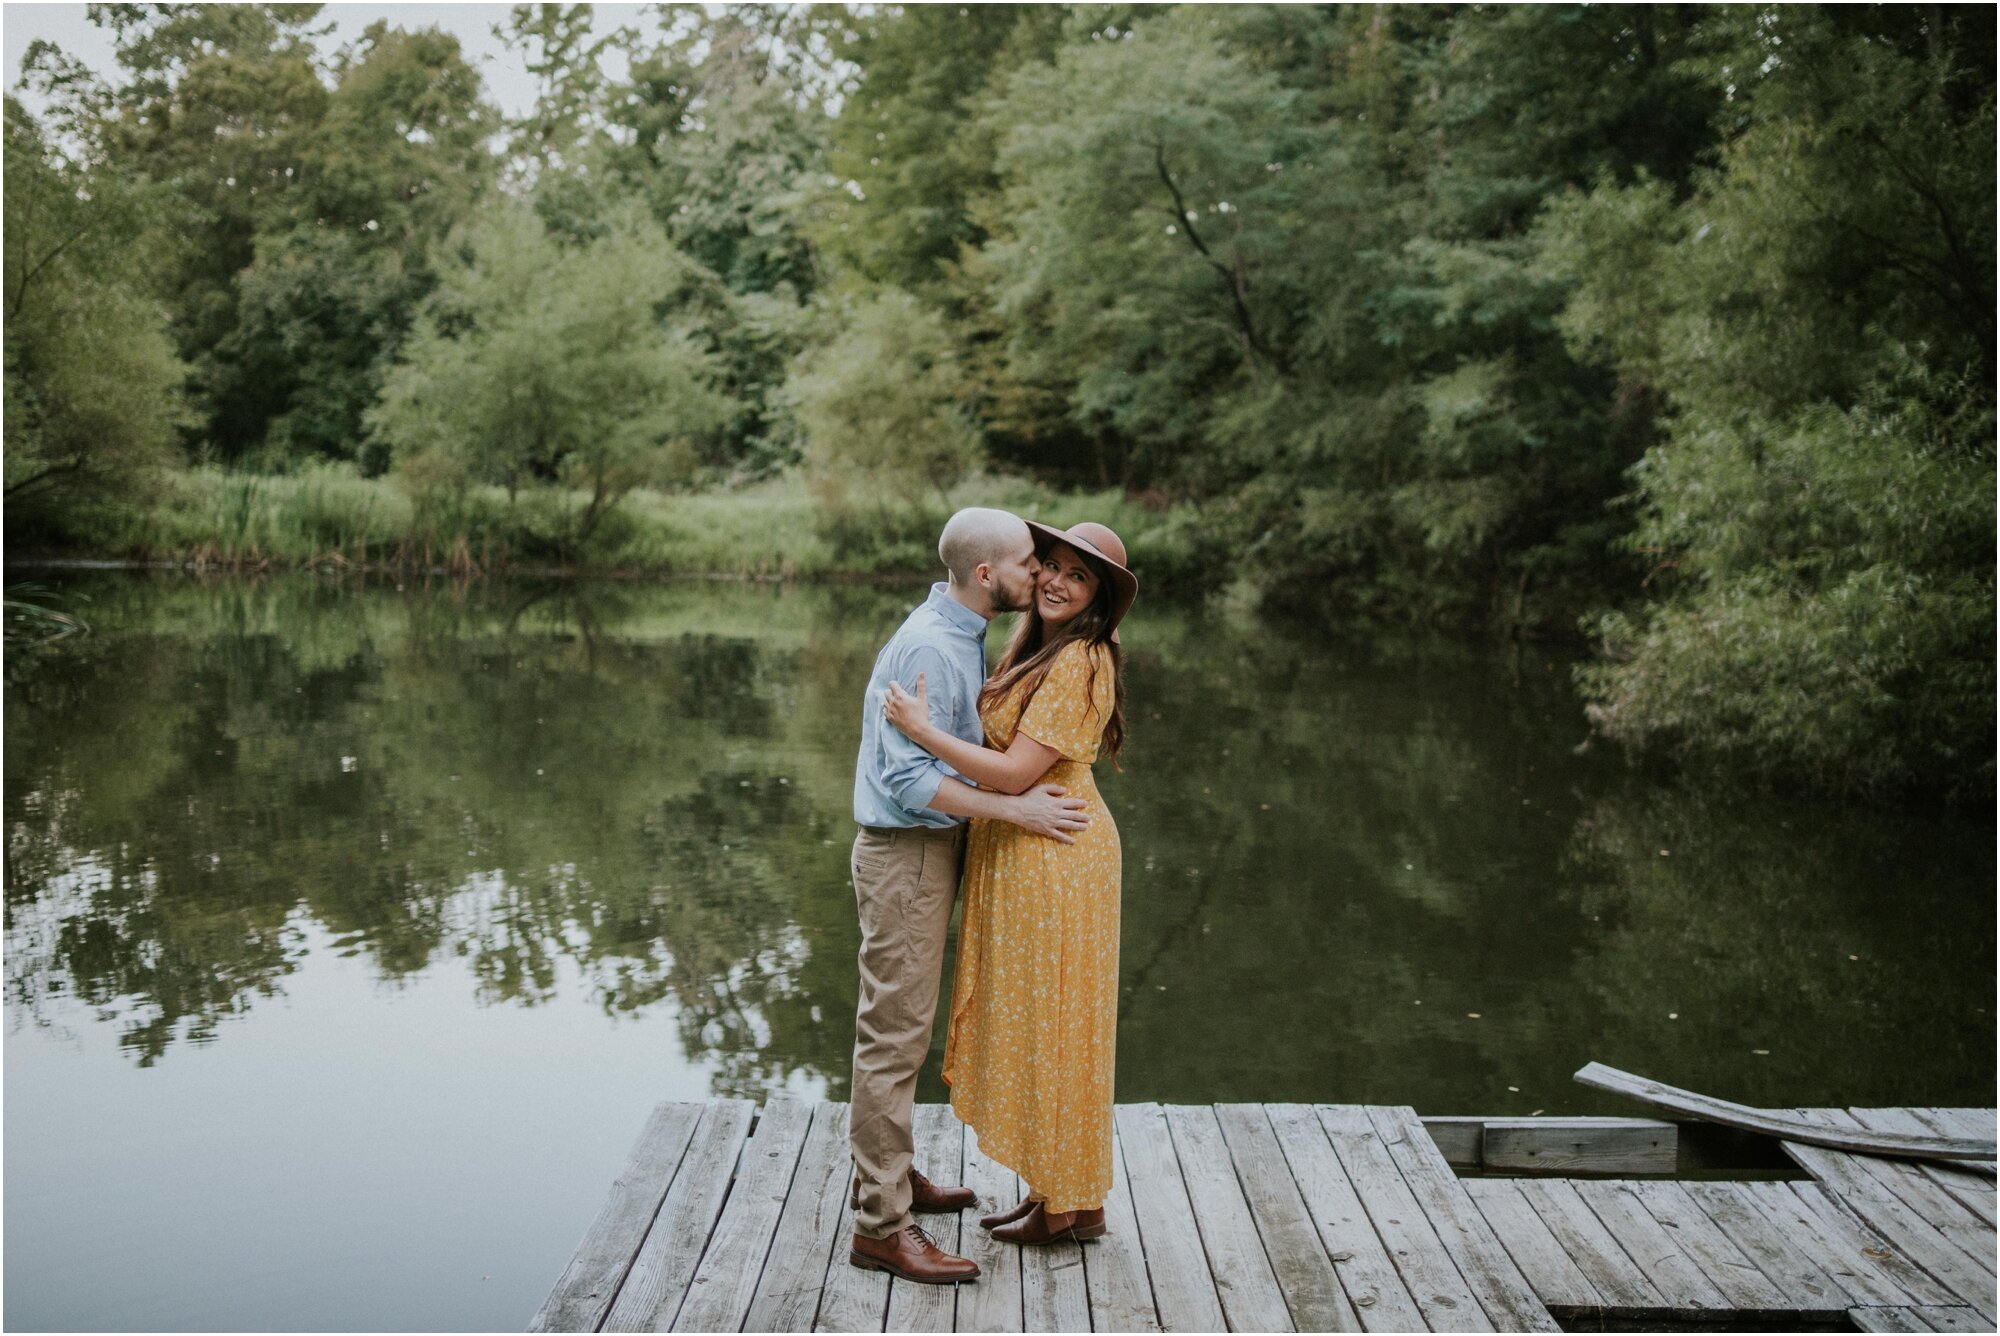 kingsport-tennessee-backyard-pond-bays-mountain-summer-engagement-session_0038.jpg